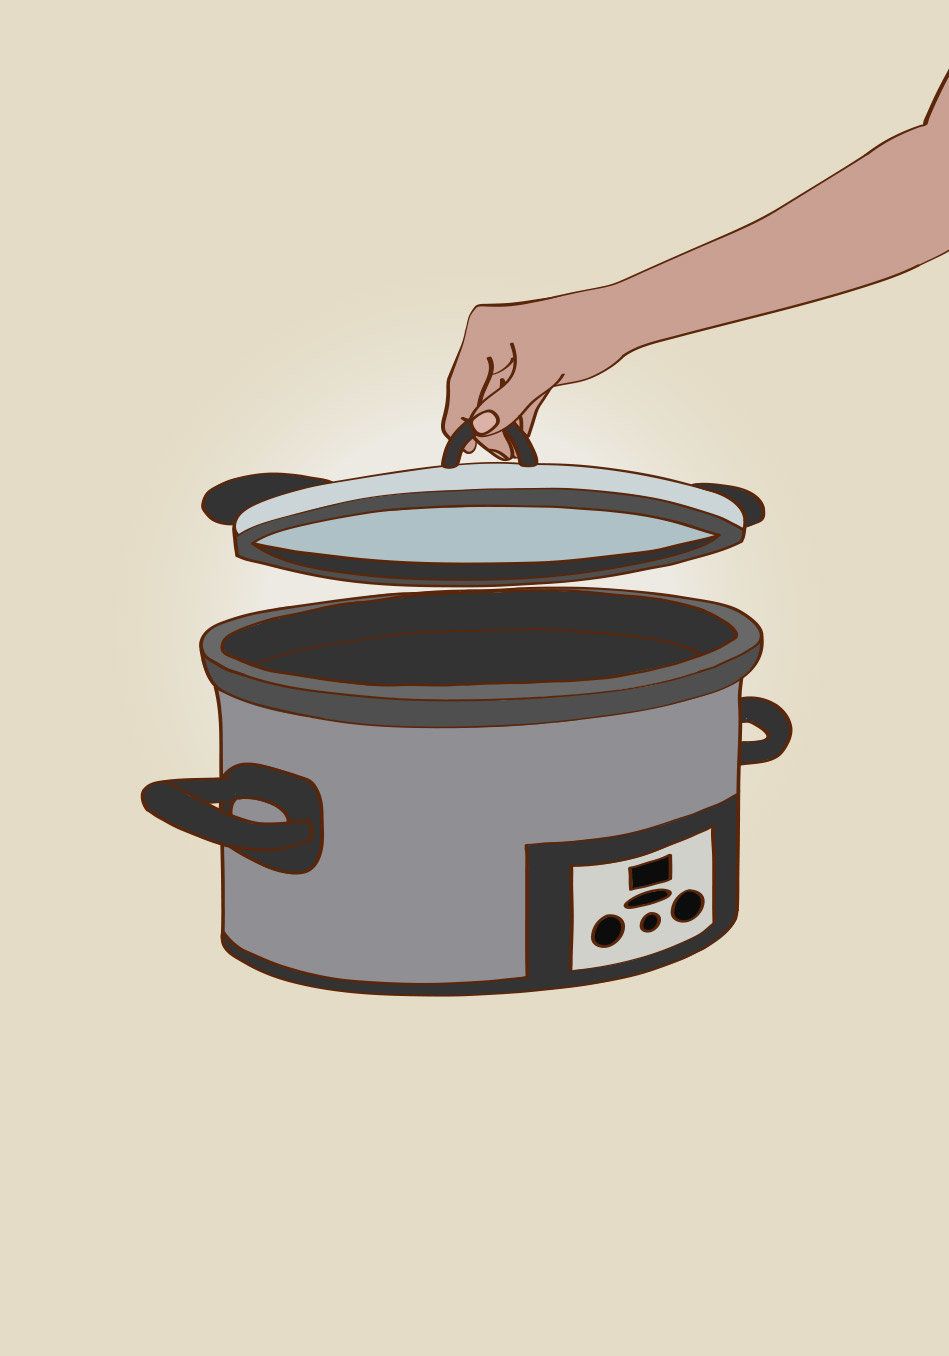 Myth #1: If You Open The Lid During Cooking, You'll Ruin Dinner